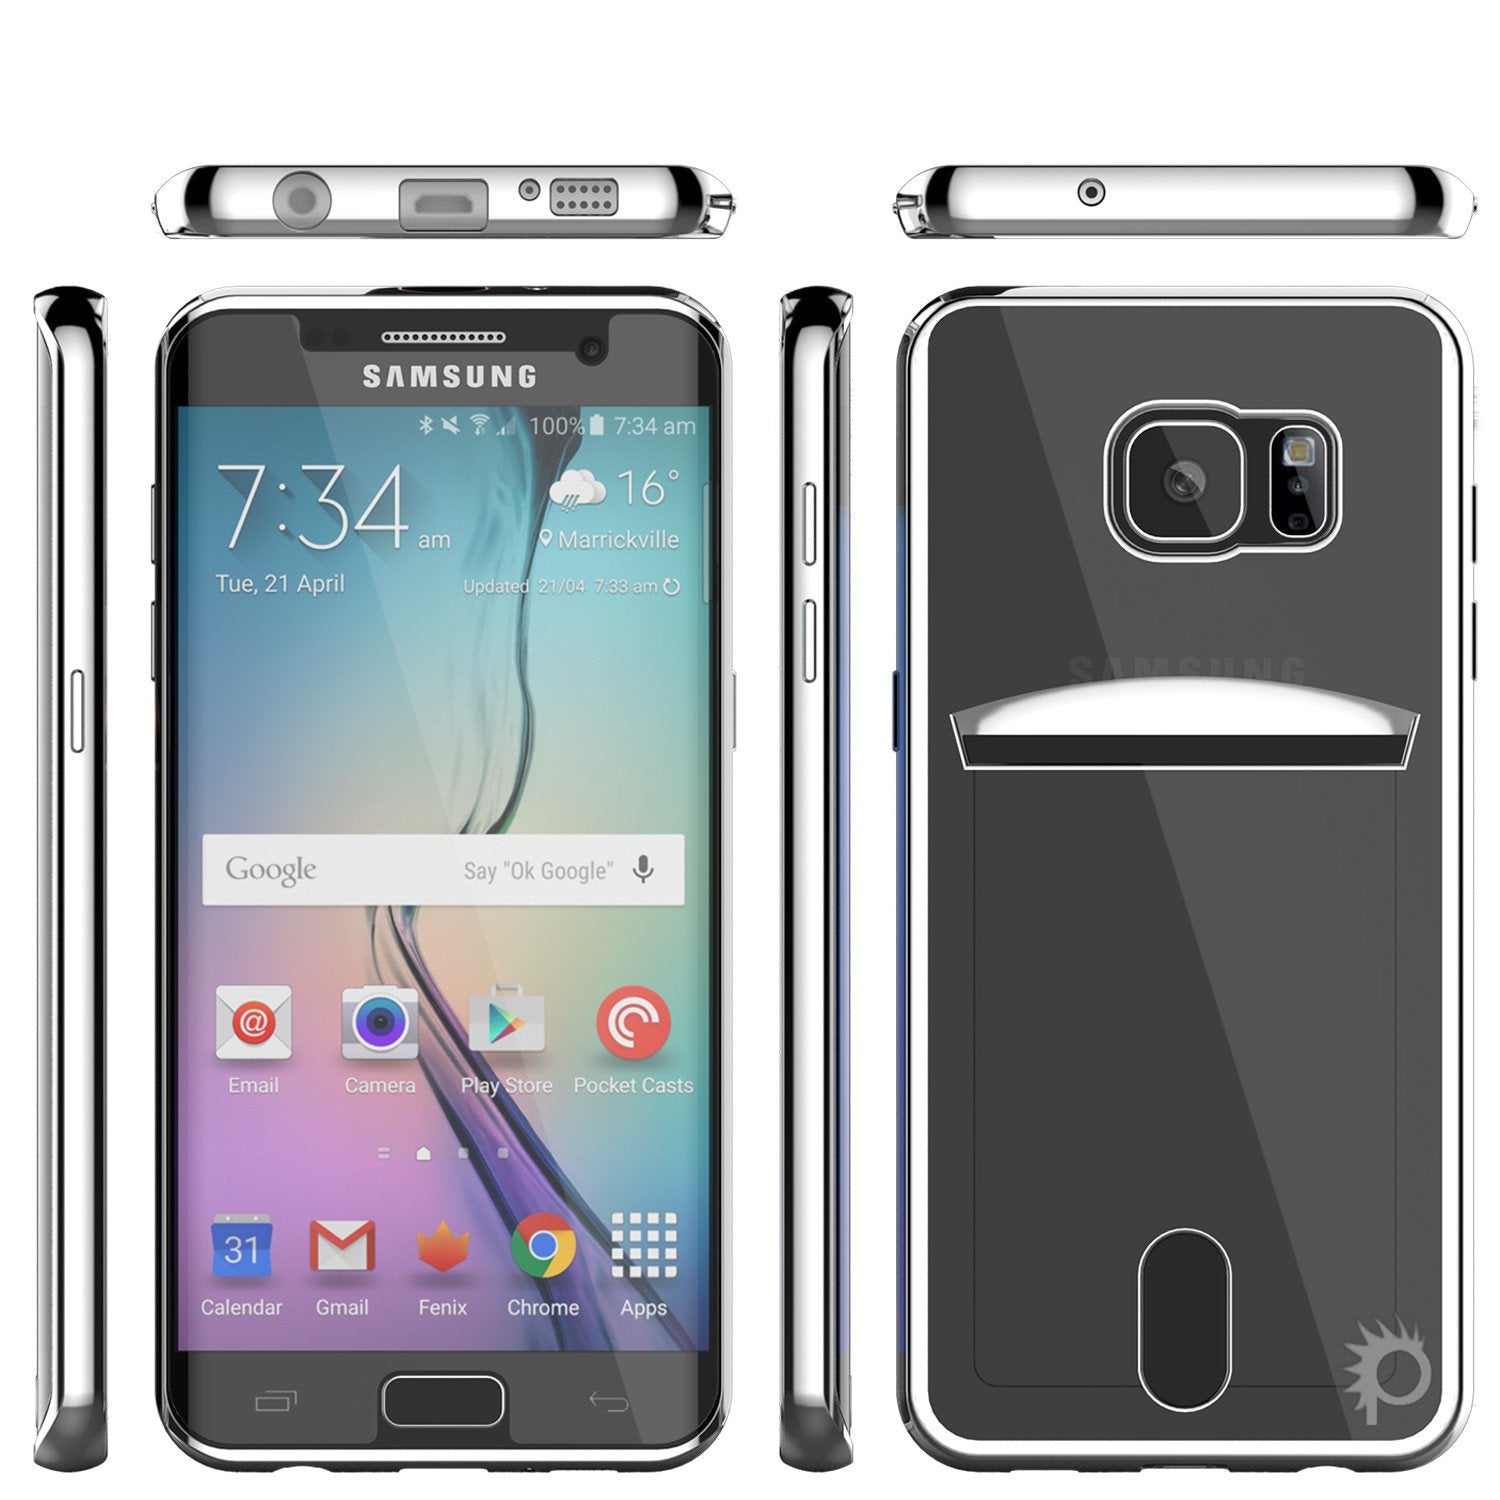 Galaxy S6 Case, PUNKCASE® LUCID Silver Series | Card Slot